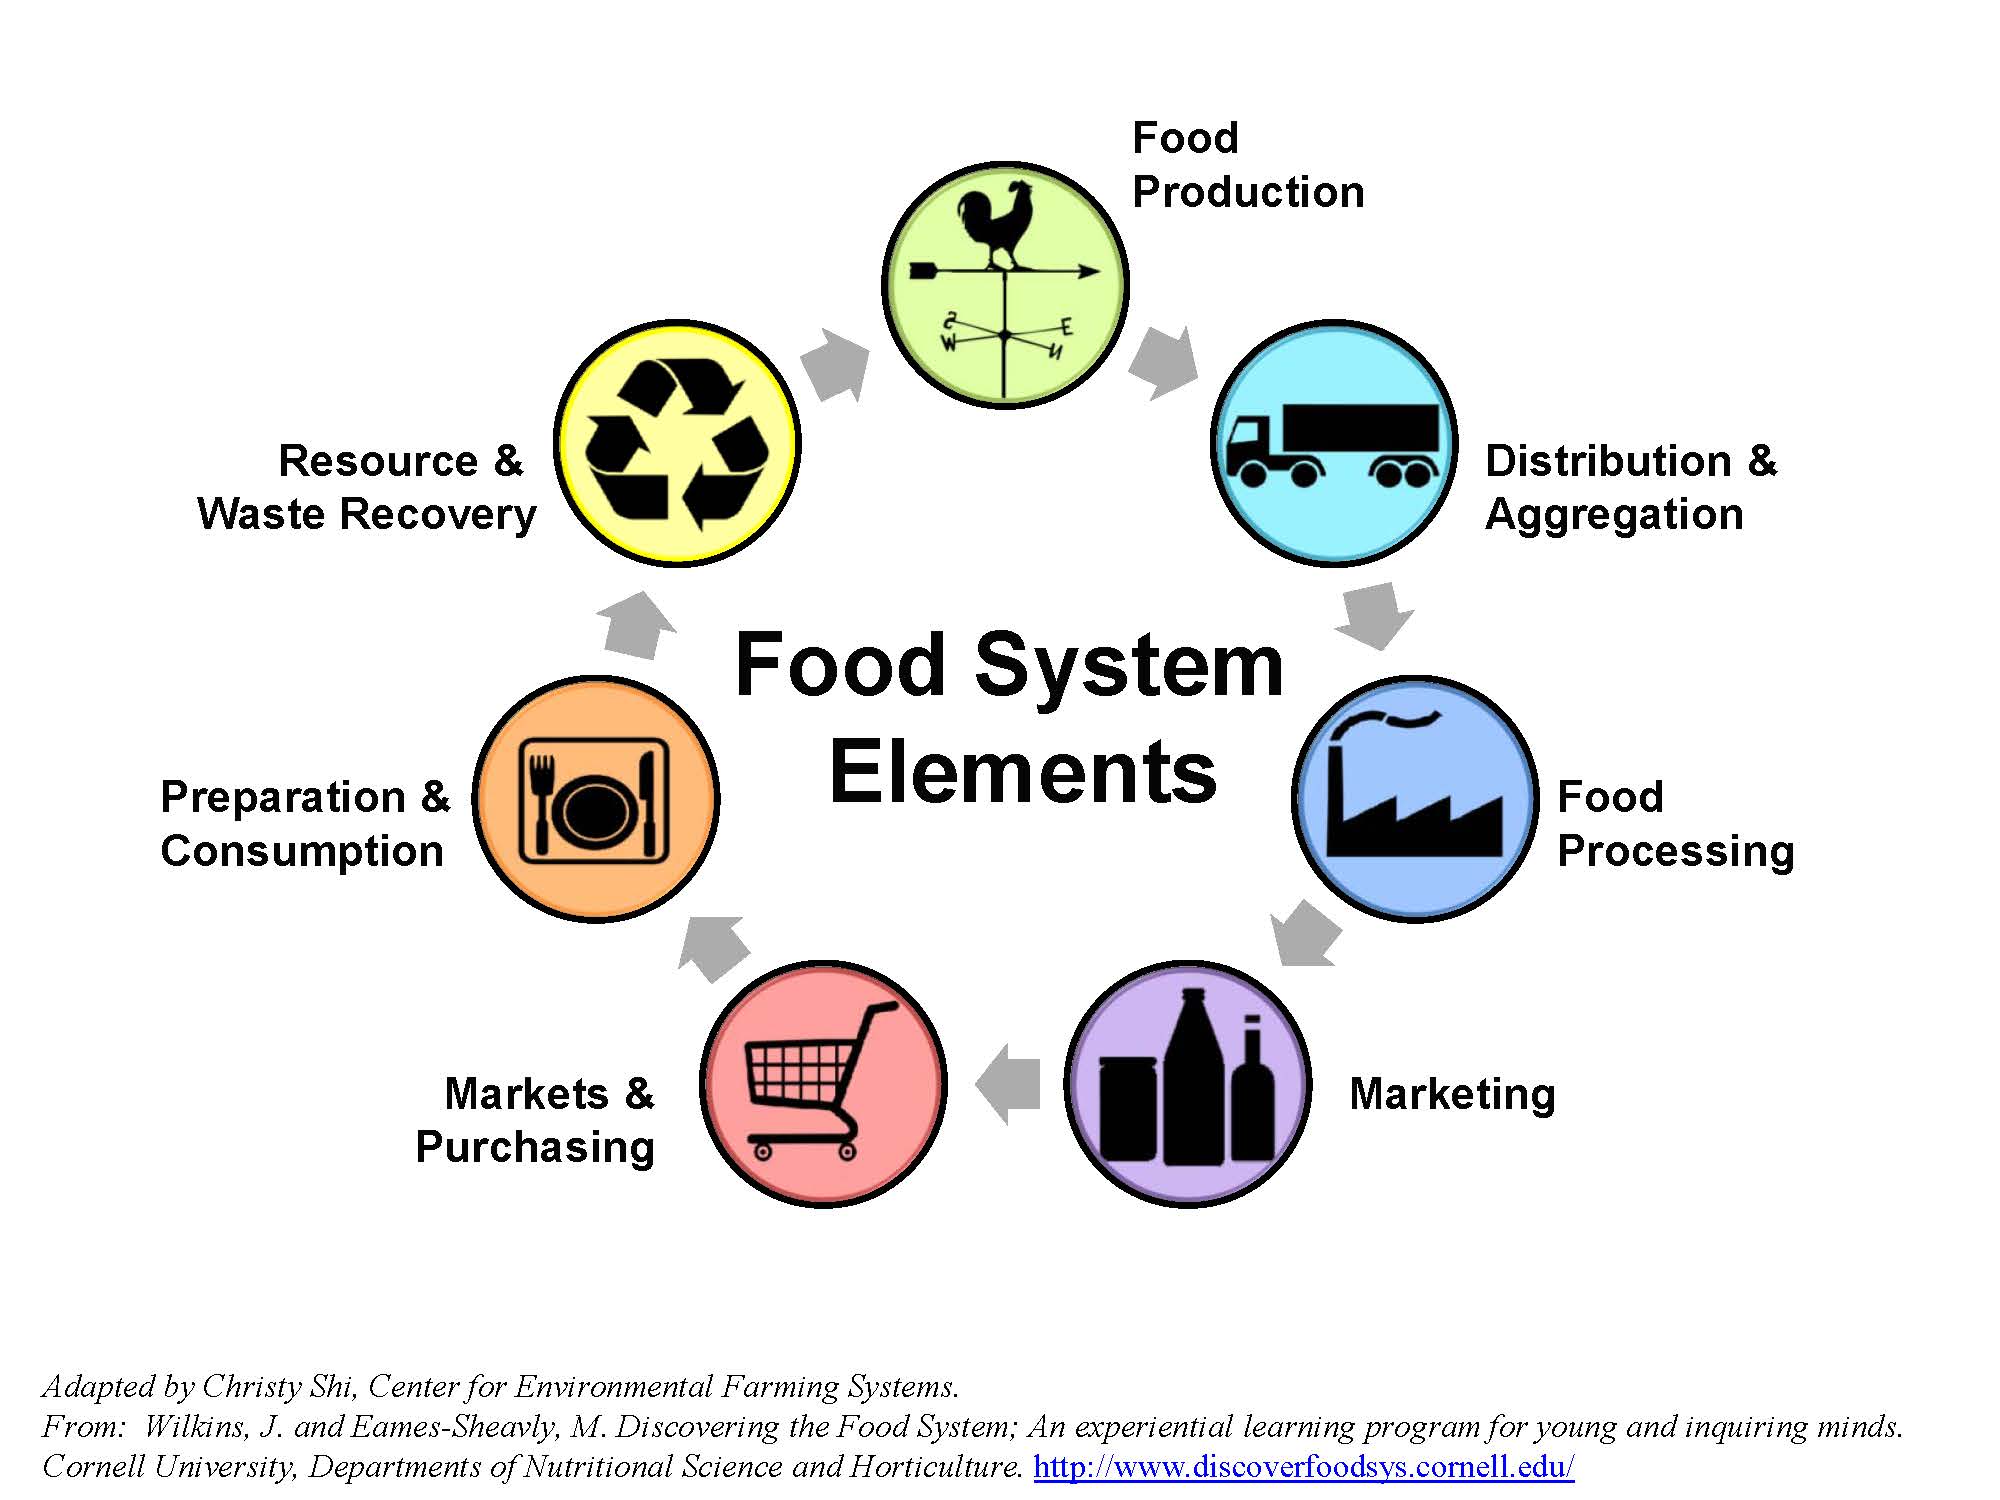 https://localfood.ces.ncsu.edu/food-system-supply-chain/